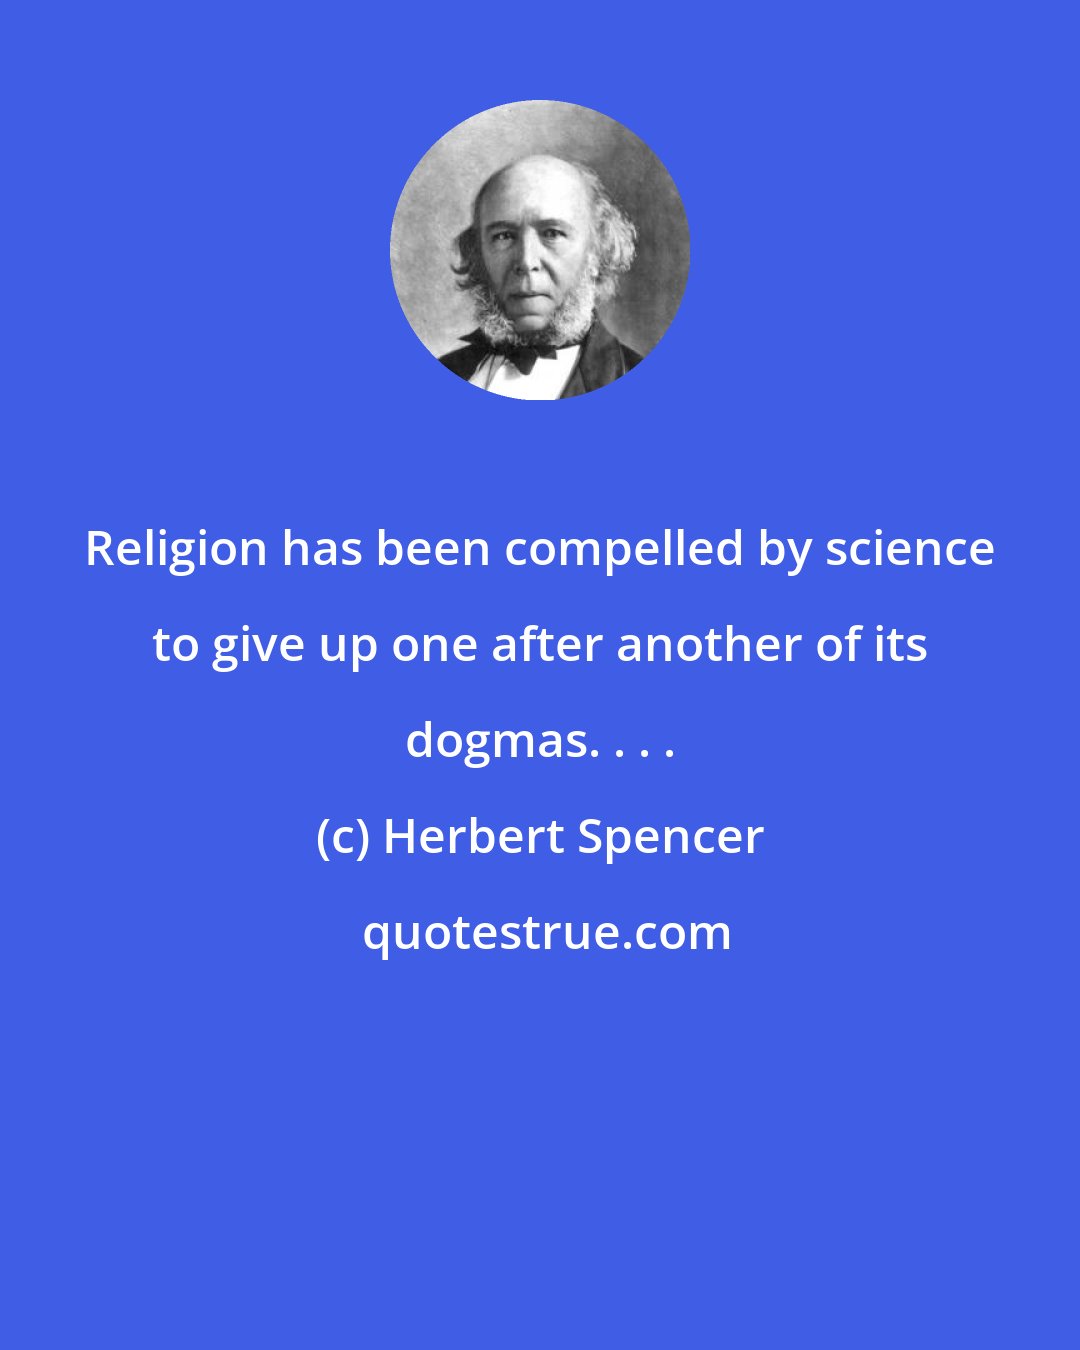 Herbert Spencer: Religion has been compelled by science to give up one after another of its dogmas. . . .